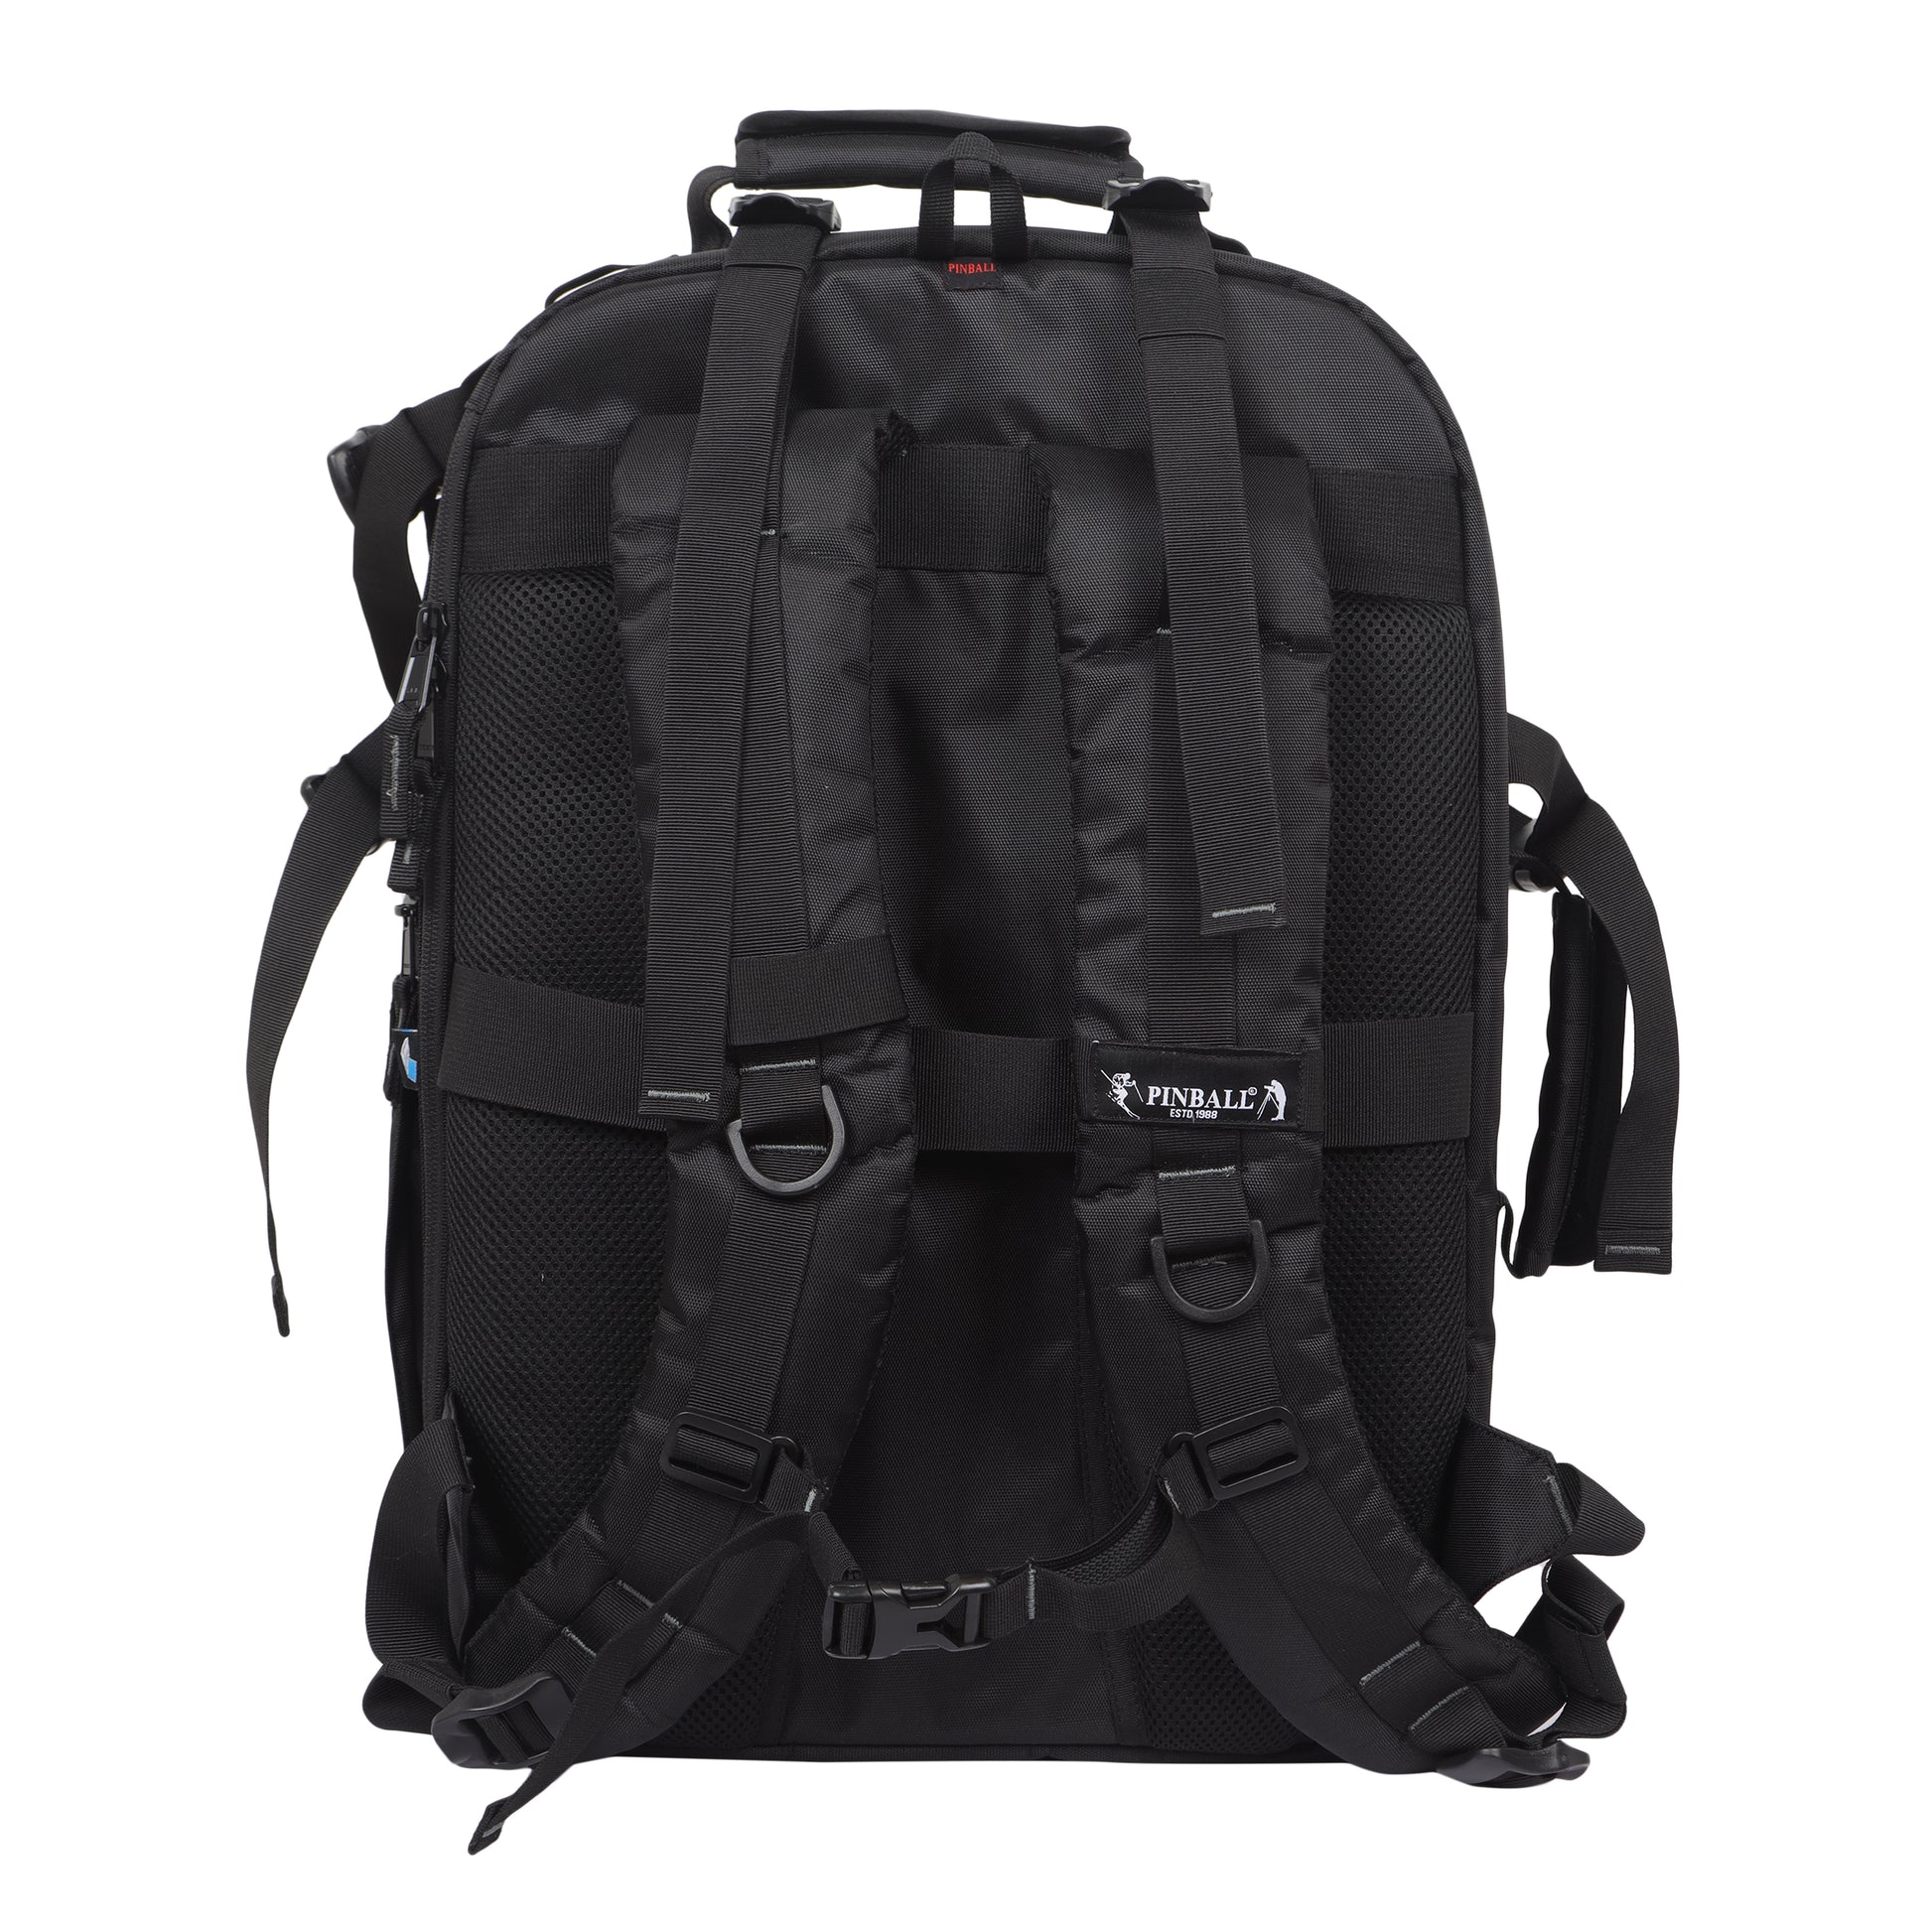 Image: Back view of the P70 Magnet DSLR camera bag, showcasing its padded back panel and breathable materials for comfortable wear. The bag features additional compartments and pockets for organizing smaller accessories. Carry your gear with ease and comfort using the P70 Magnet camera bag.